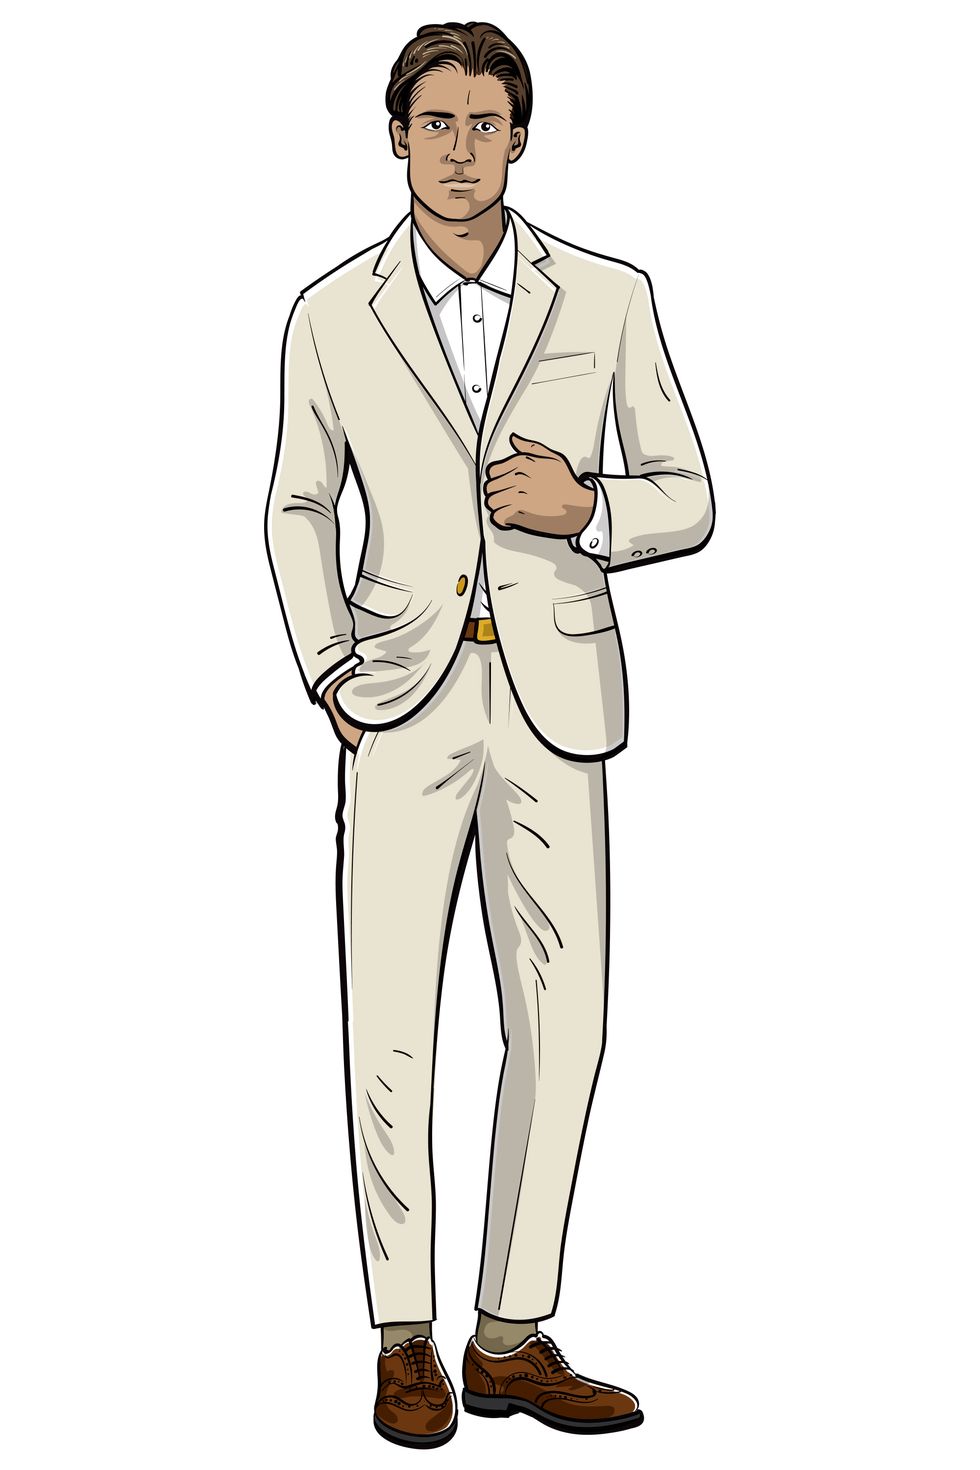 Grey Suit with White Sneakers Outfits (195 ideas & outfits)